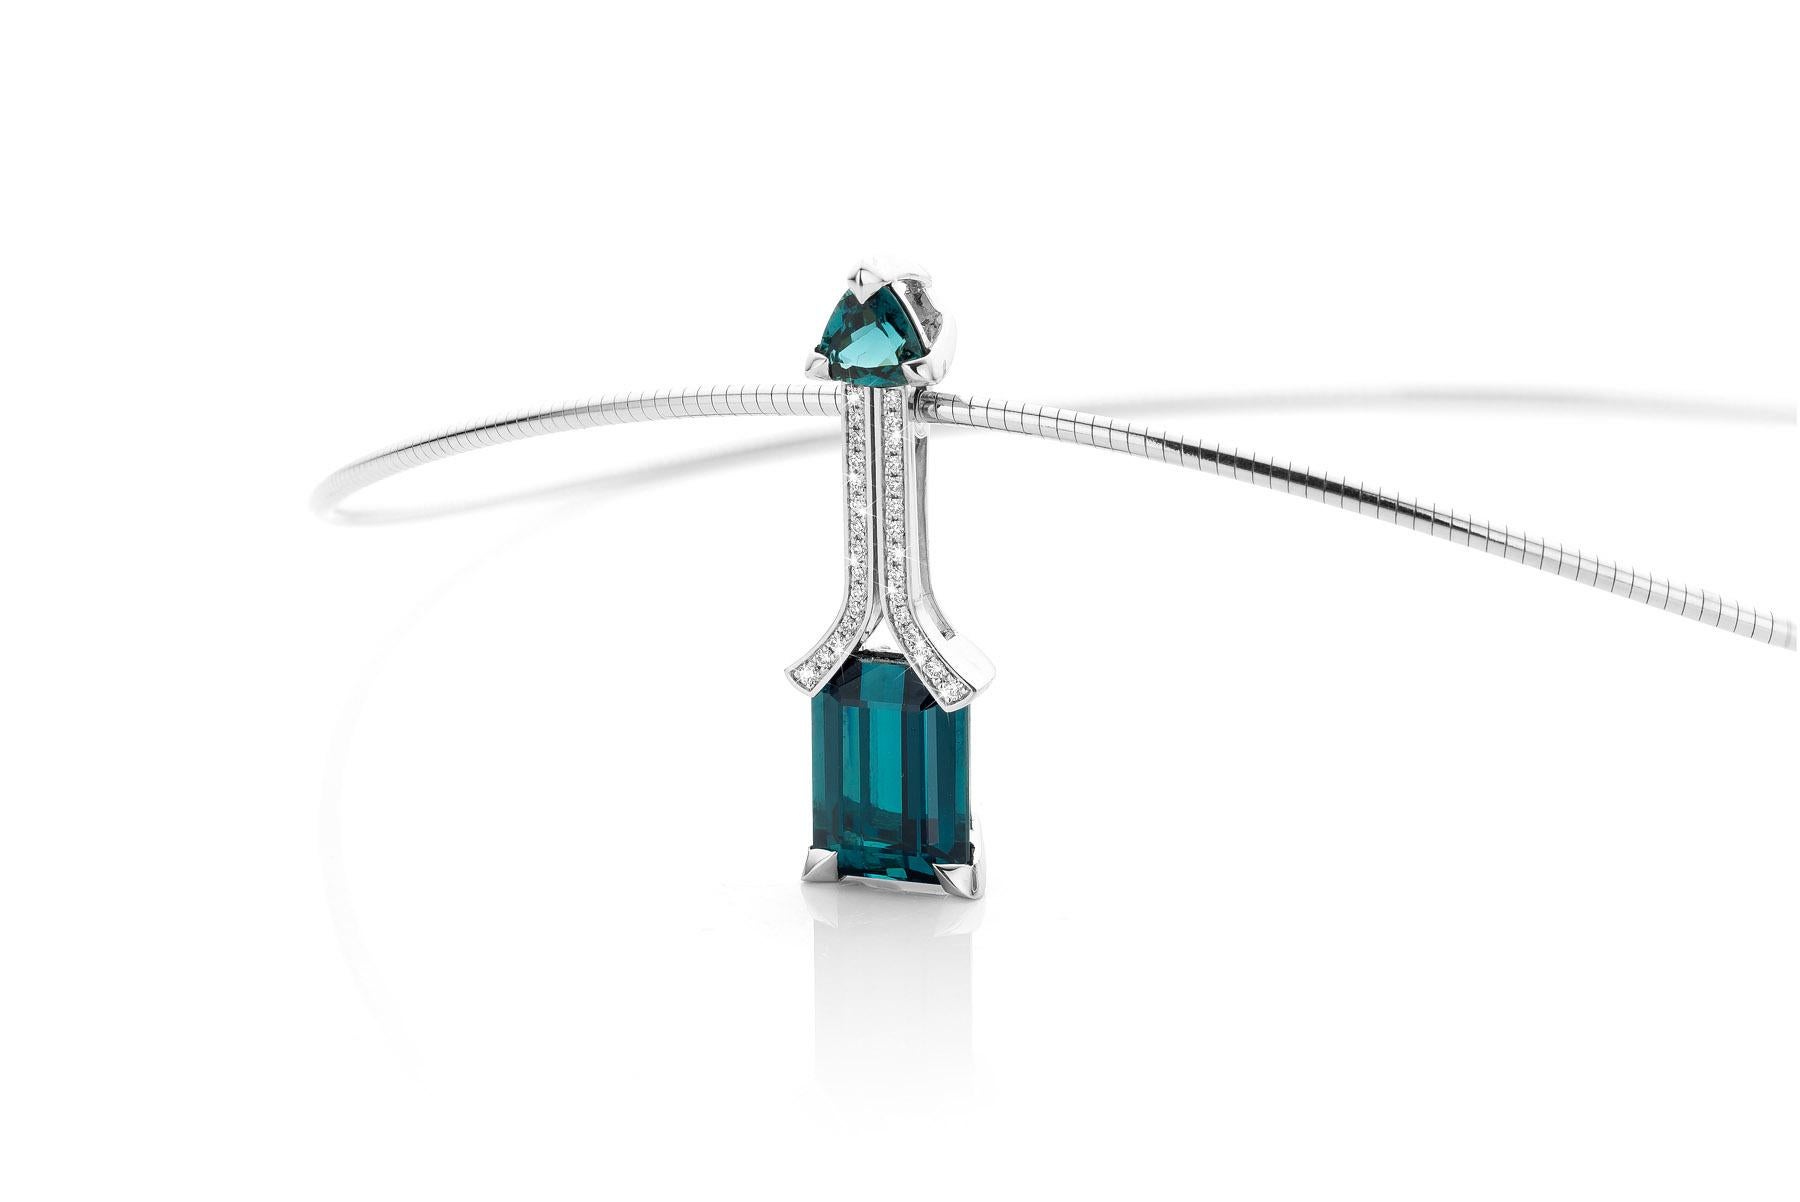 Cober Jewellery white gold pendant with Tourmalines and diamonds

This is a white gold 18K pendant with two Tourmalines and 30 Diamonds. The two Tourmalines weigh 7,04 ct. and 0,68 ct. The Diamonds have a total weight of 0,15 ct.
Please note, that